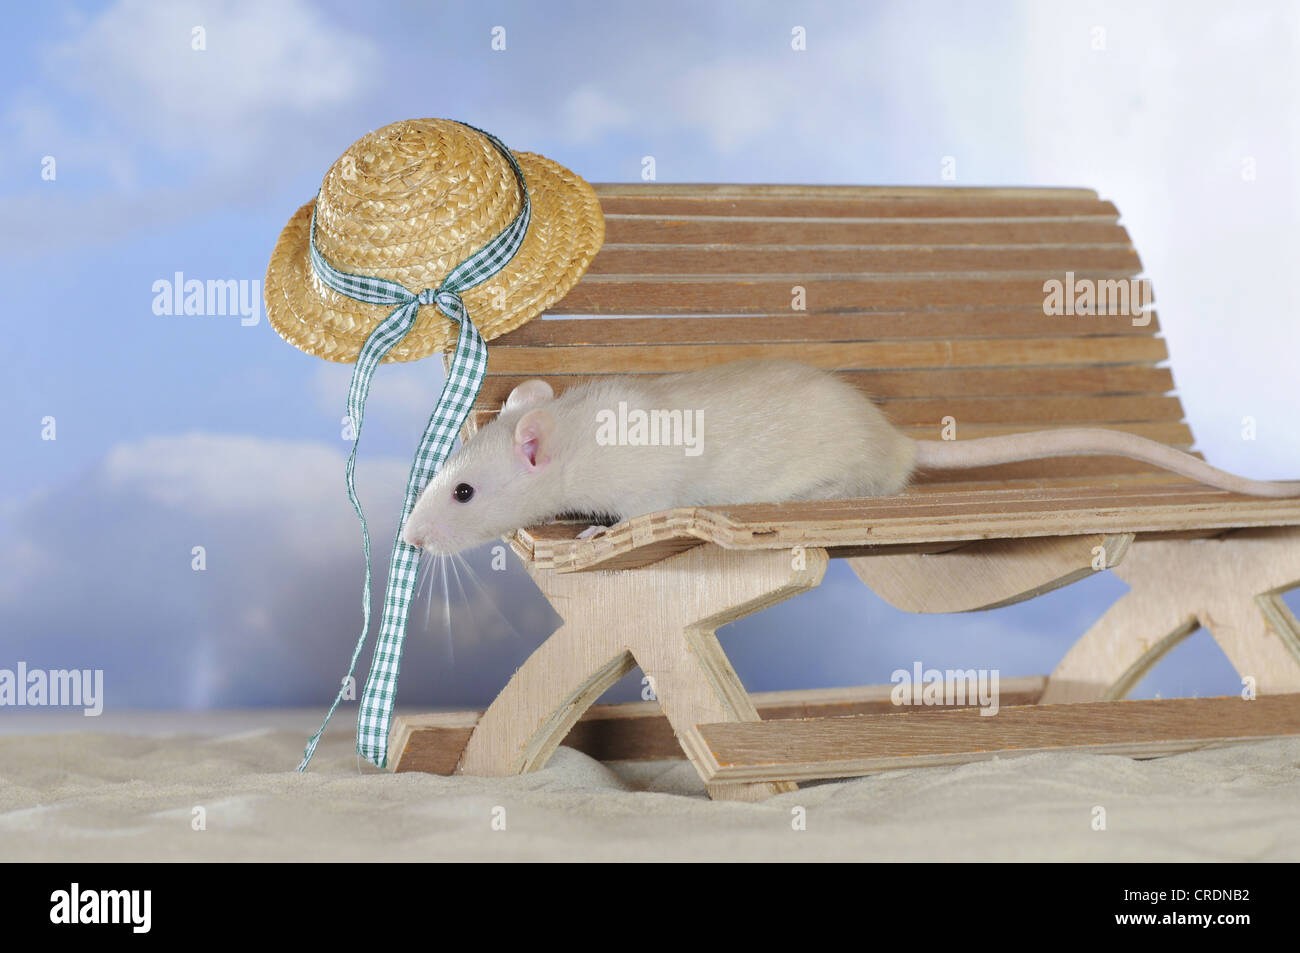 Fancy Rat, cream coloured, on a small wooden bench, with a sunhat Stock Photo